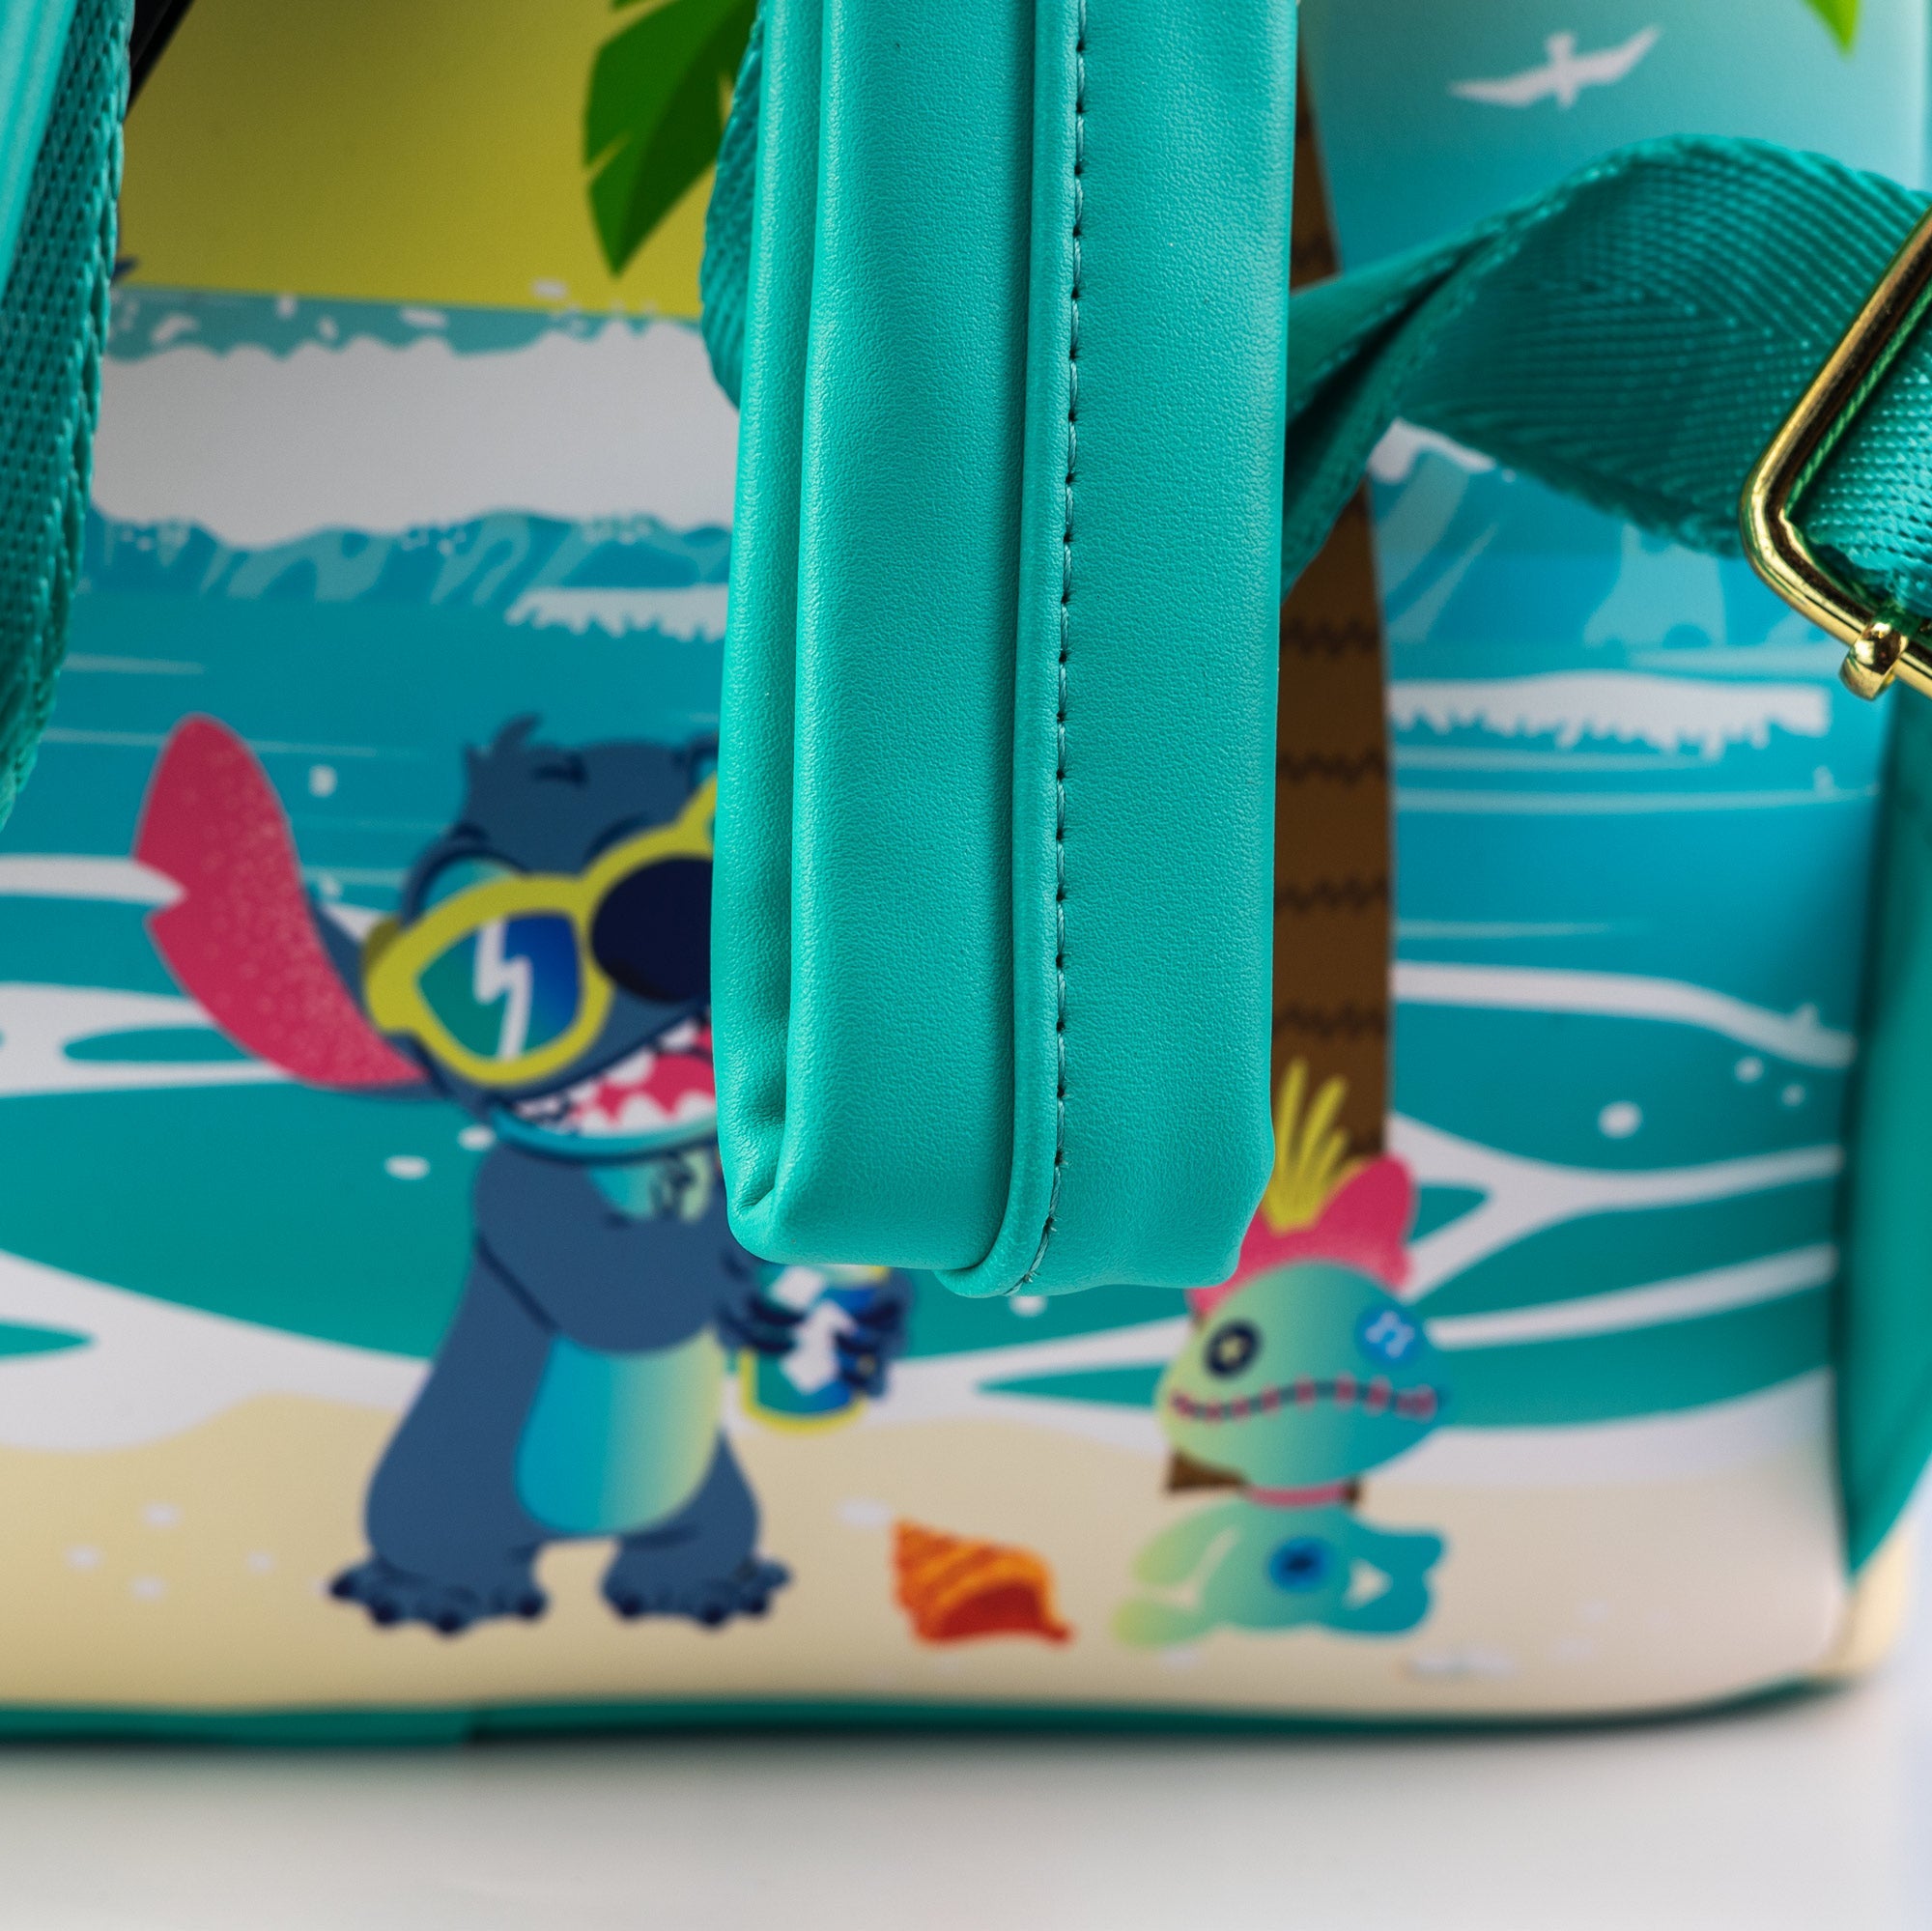 Loungefly x Disney Lilo and Stitch Sandcastle Mini Backpack - GeekCore